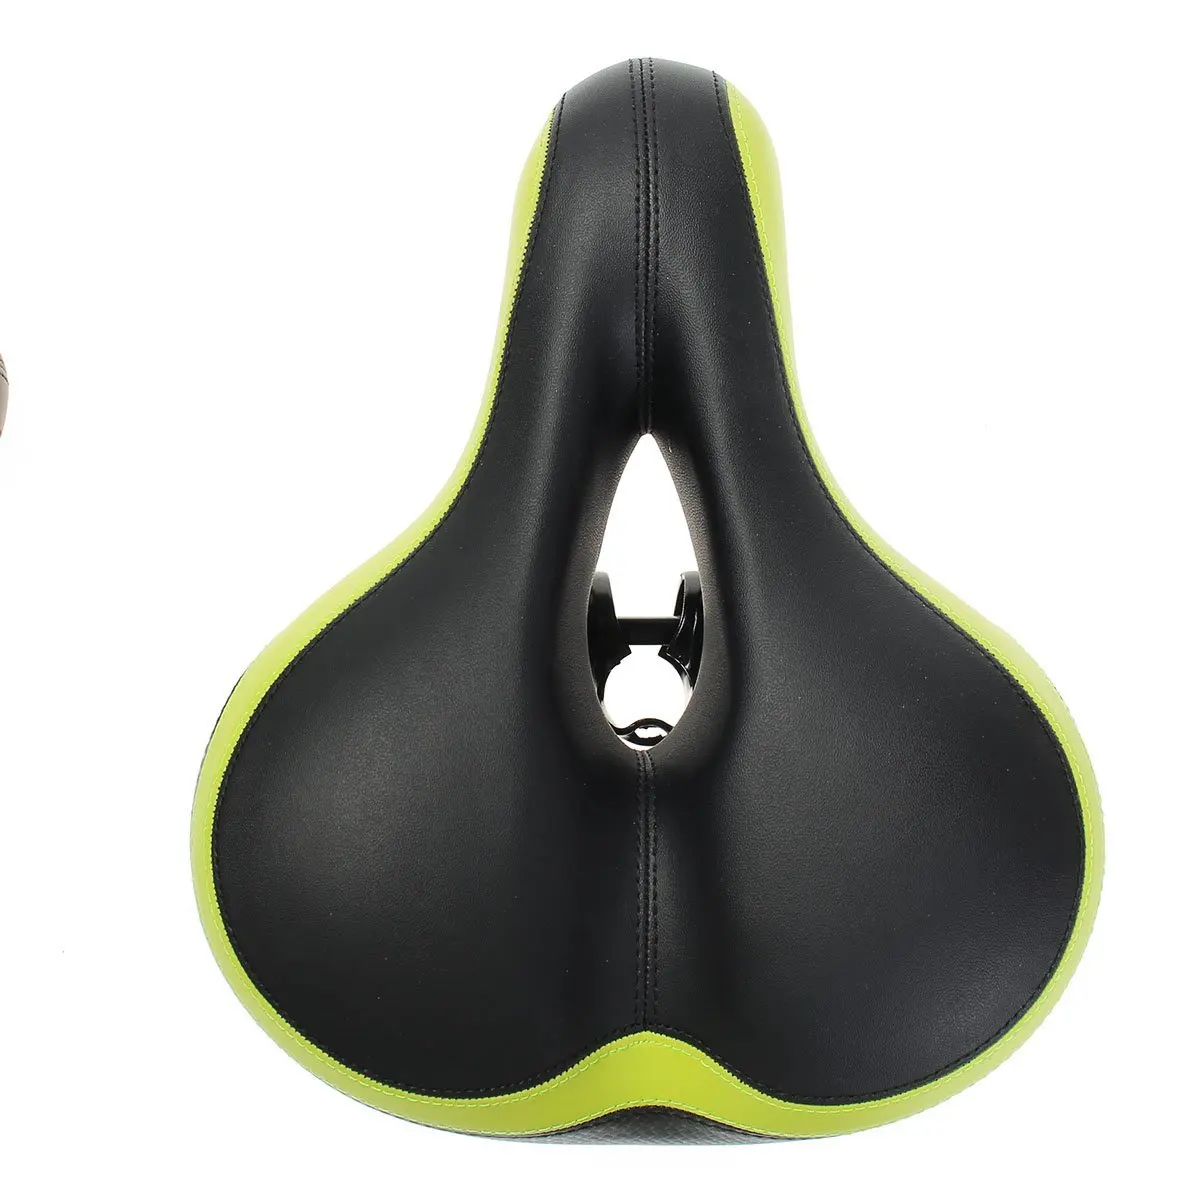 

UPANBIKE Bike Saddle Shock Absorption Widen Ultra-thick Soft Comfortable Bicycle Seat For Mountain Road Bike UP311-5